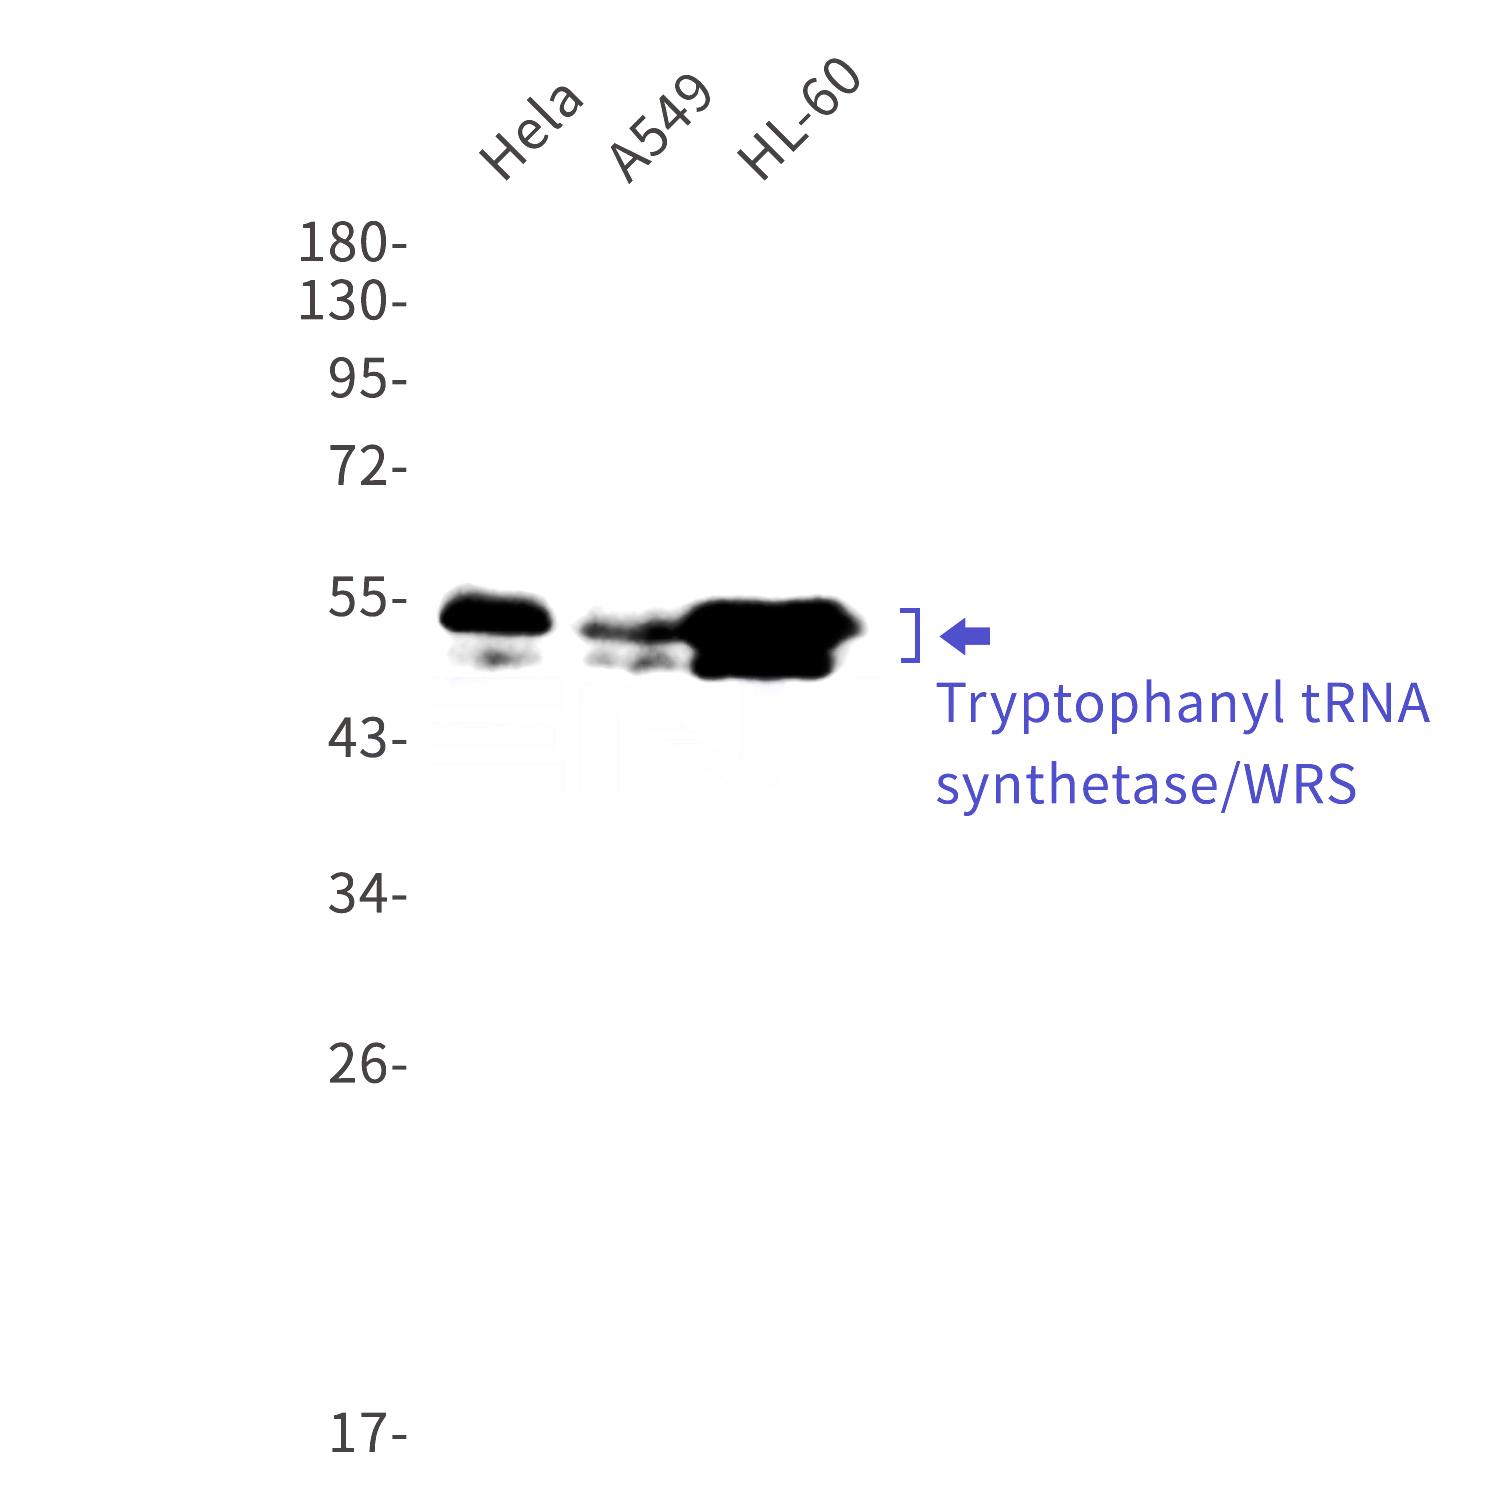 Western blot detection of Tryptophanyl tRNA synthetase/WRS in Hela,A549,HL-60 cell lysates using Tryptophanyl tRNA synthetase/WRS Rabbit mAb(1:1000 diluted).Predicted band size:53kDa.Observed band size:53kDa.